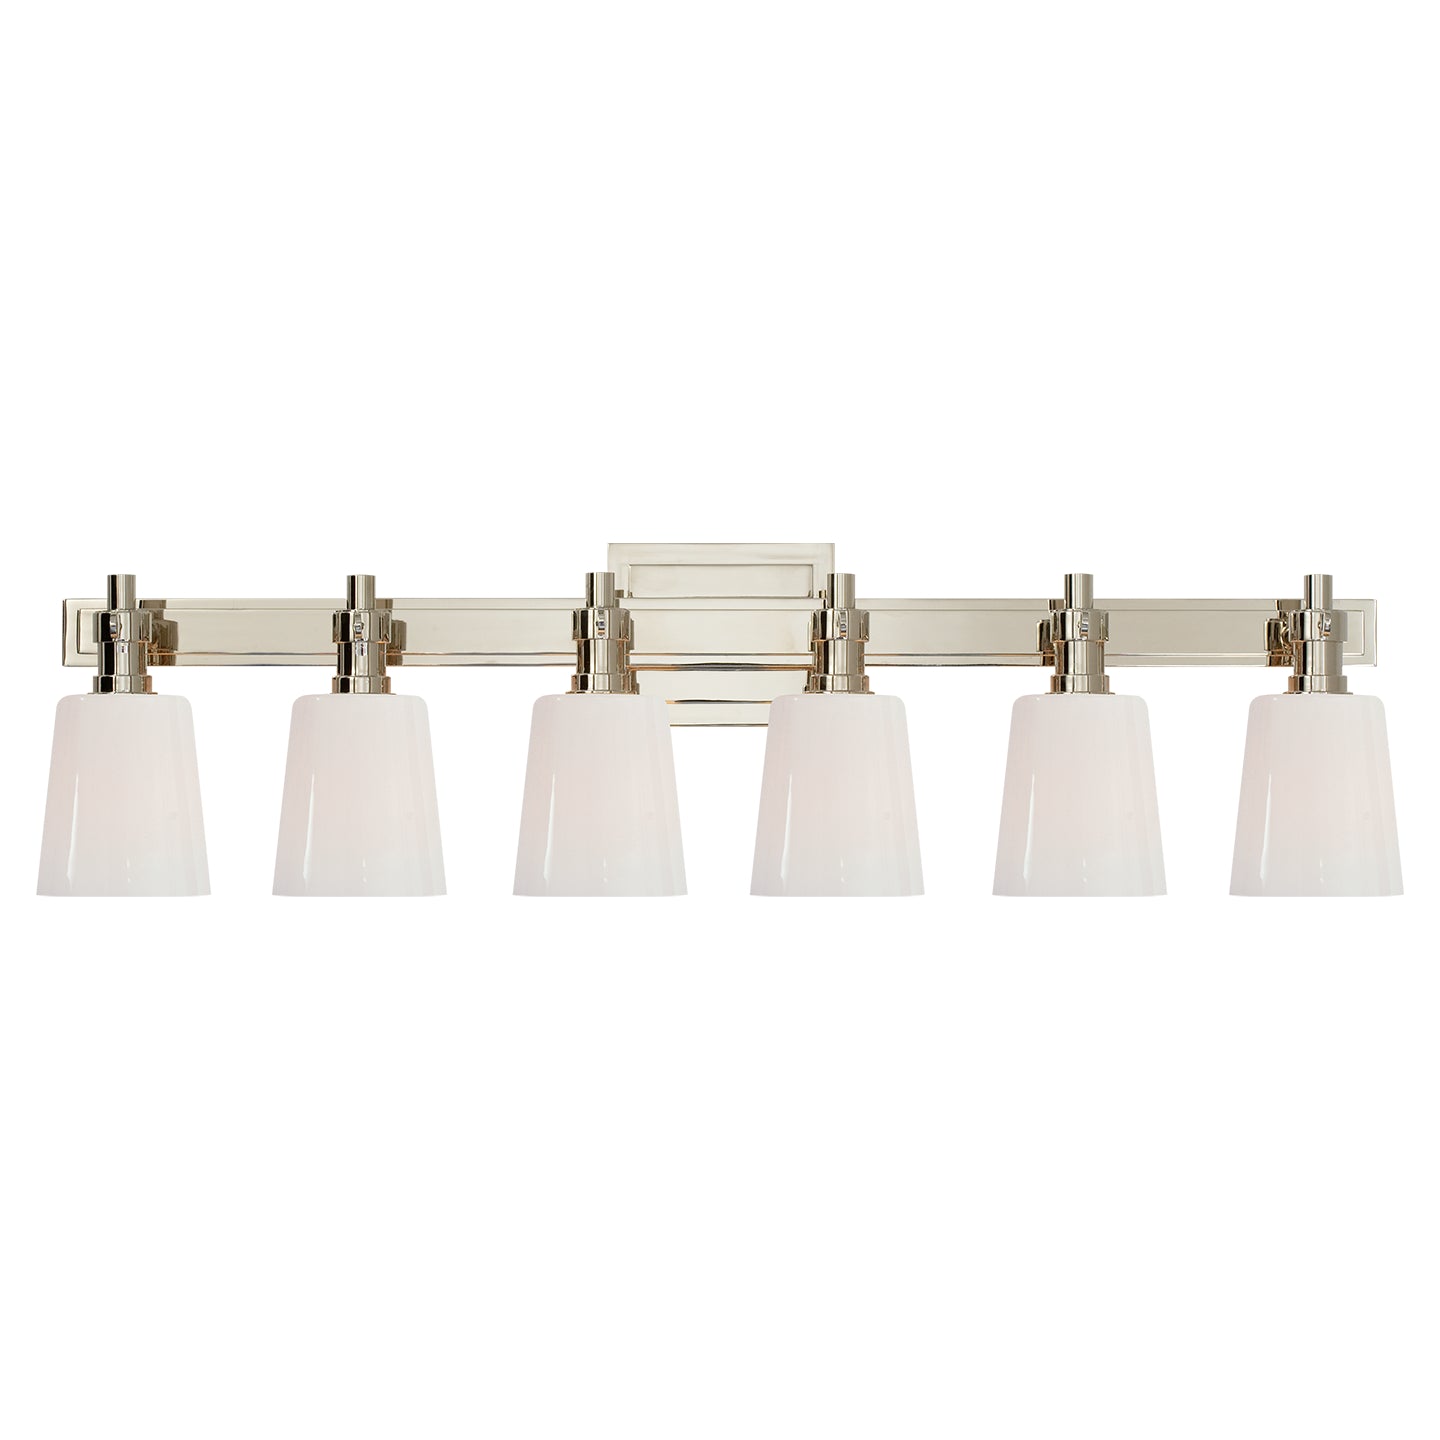 Load image into Gallery viewer, Visual Comfort Signature - TOB 2154PN-WG - Six Light Linear Bath Sconce - Bryant Bath - Polished Nickel
